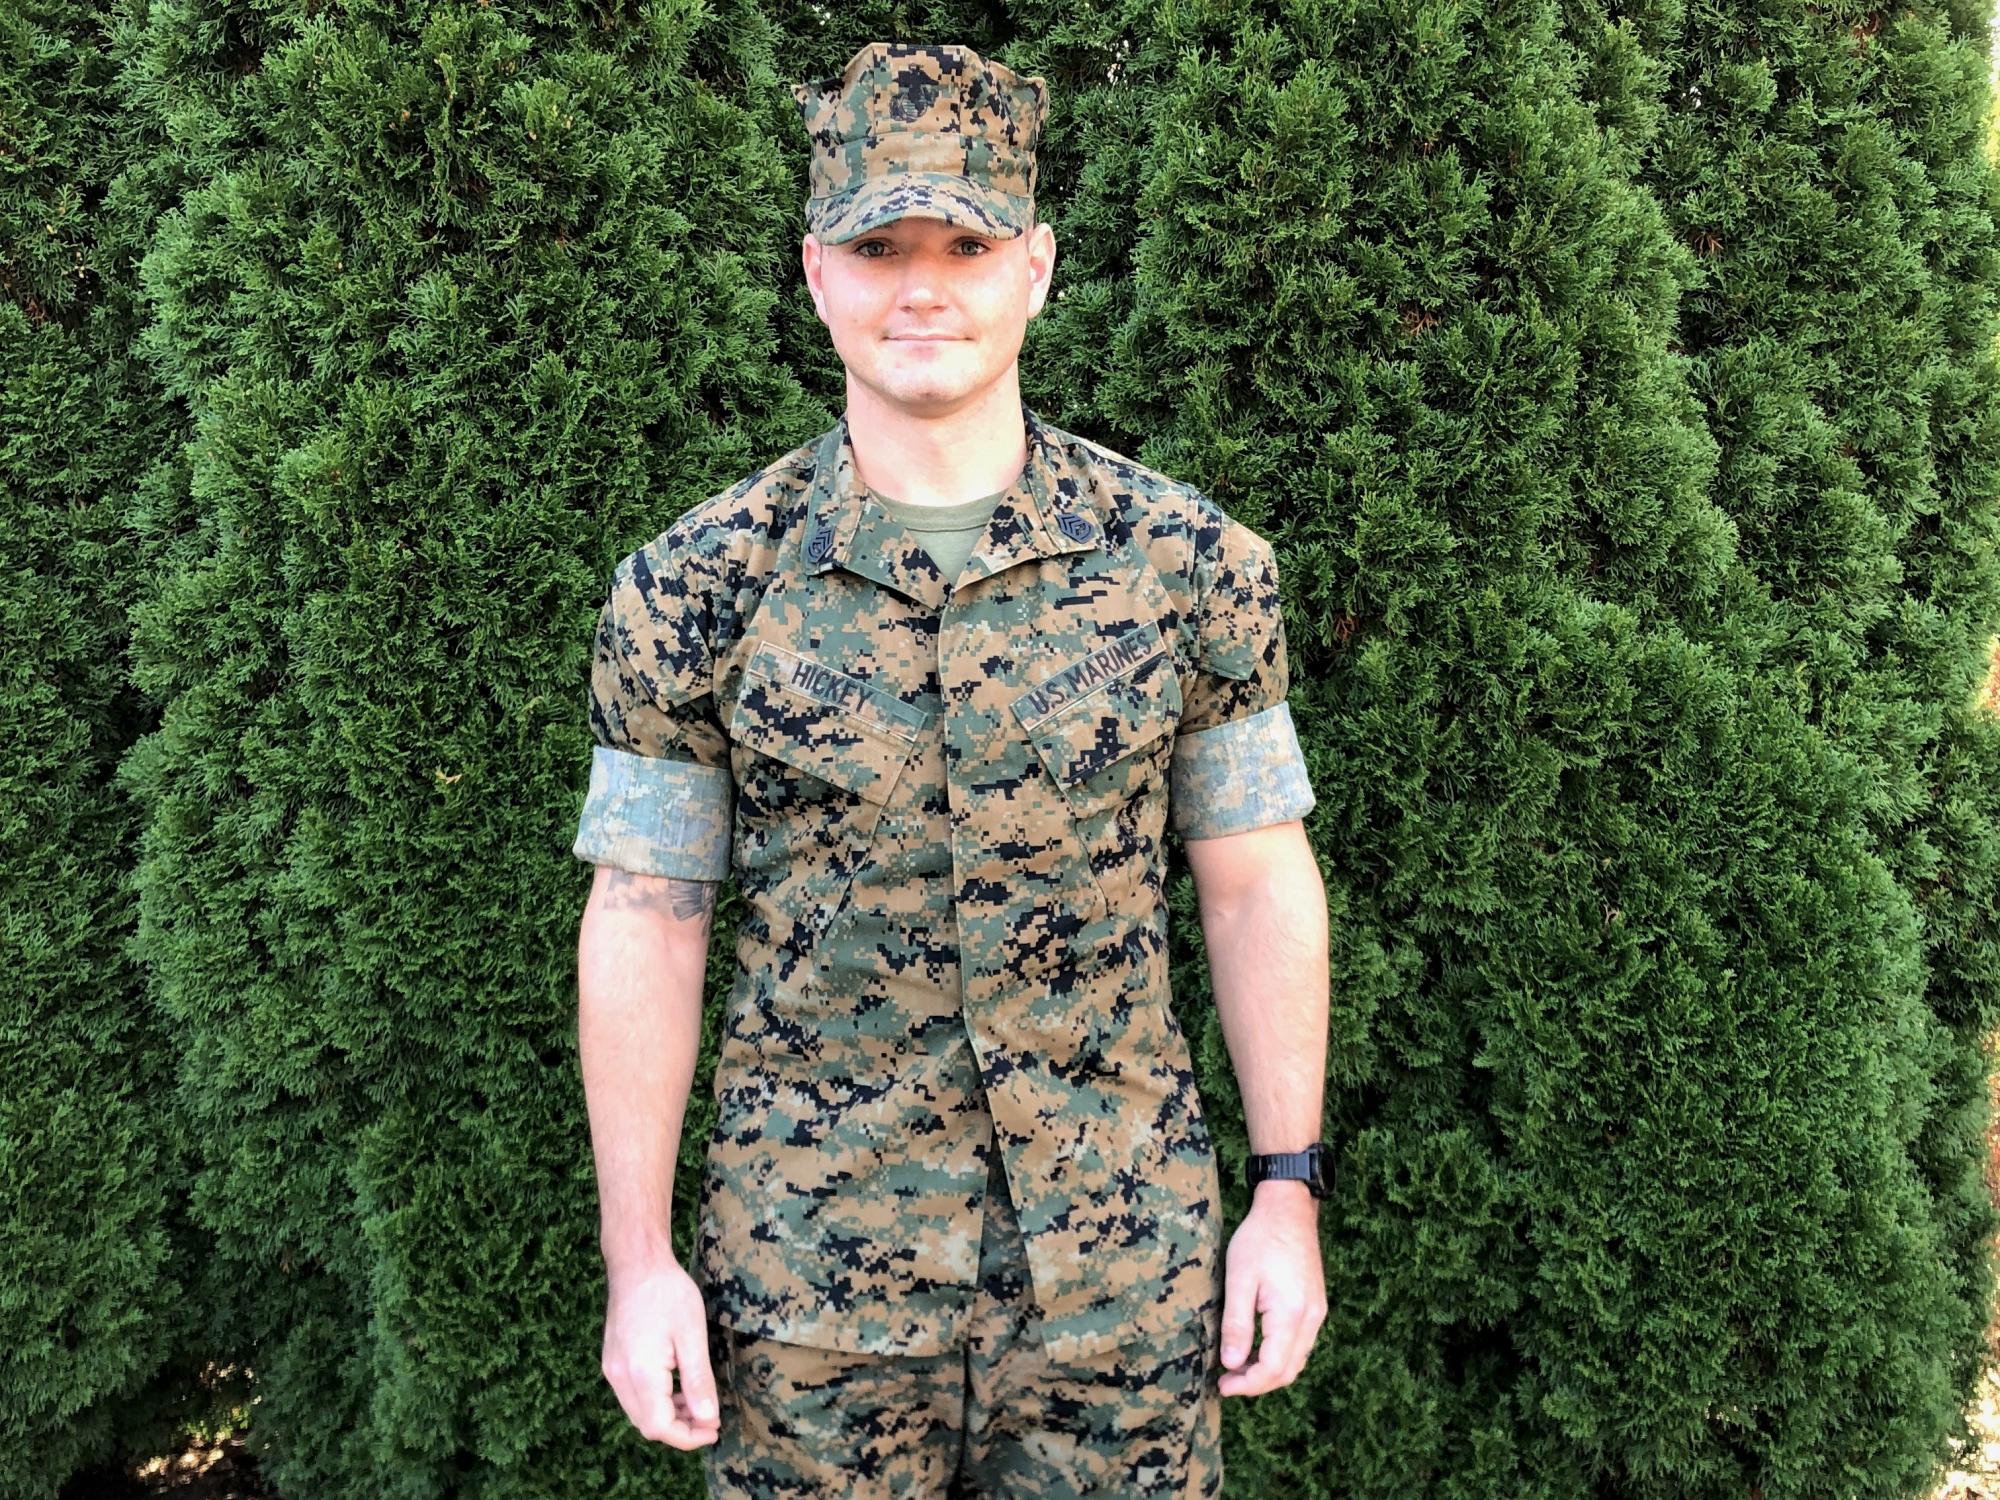 Active-duty Marine makes Penn State a stepping stone on military career path